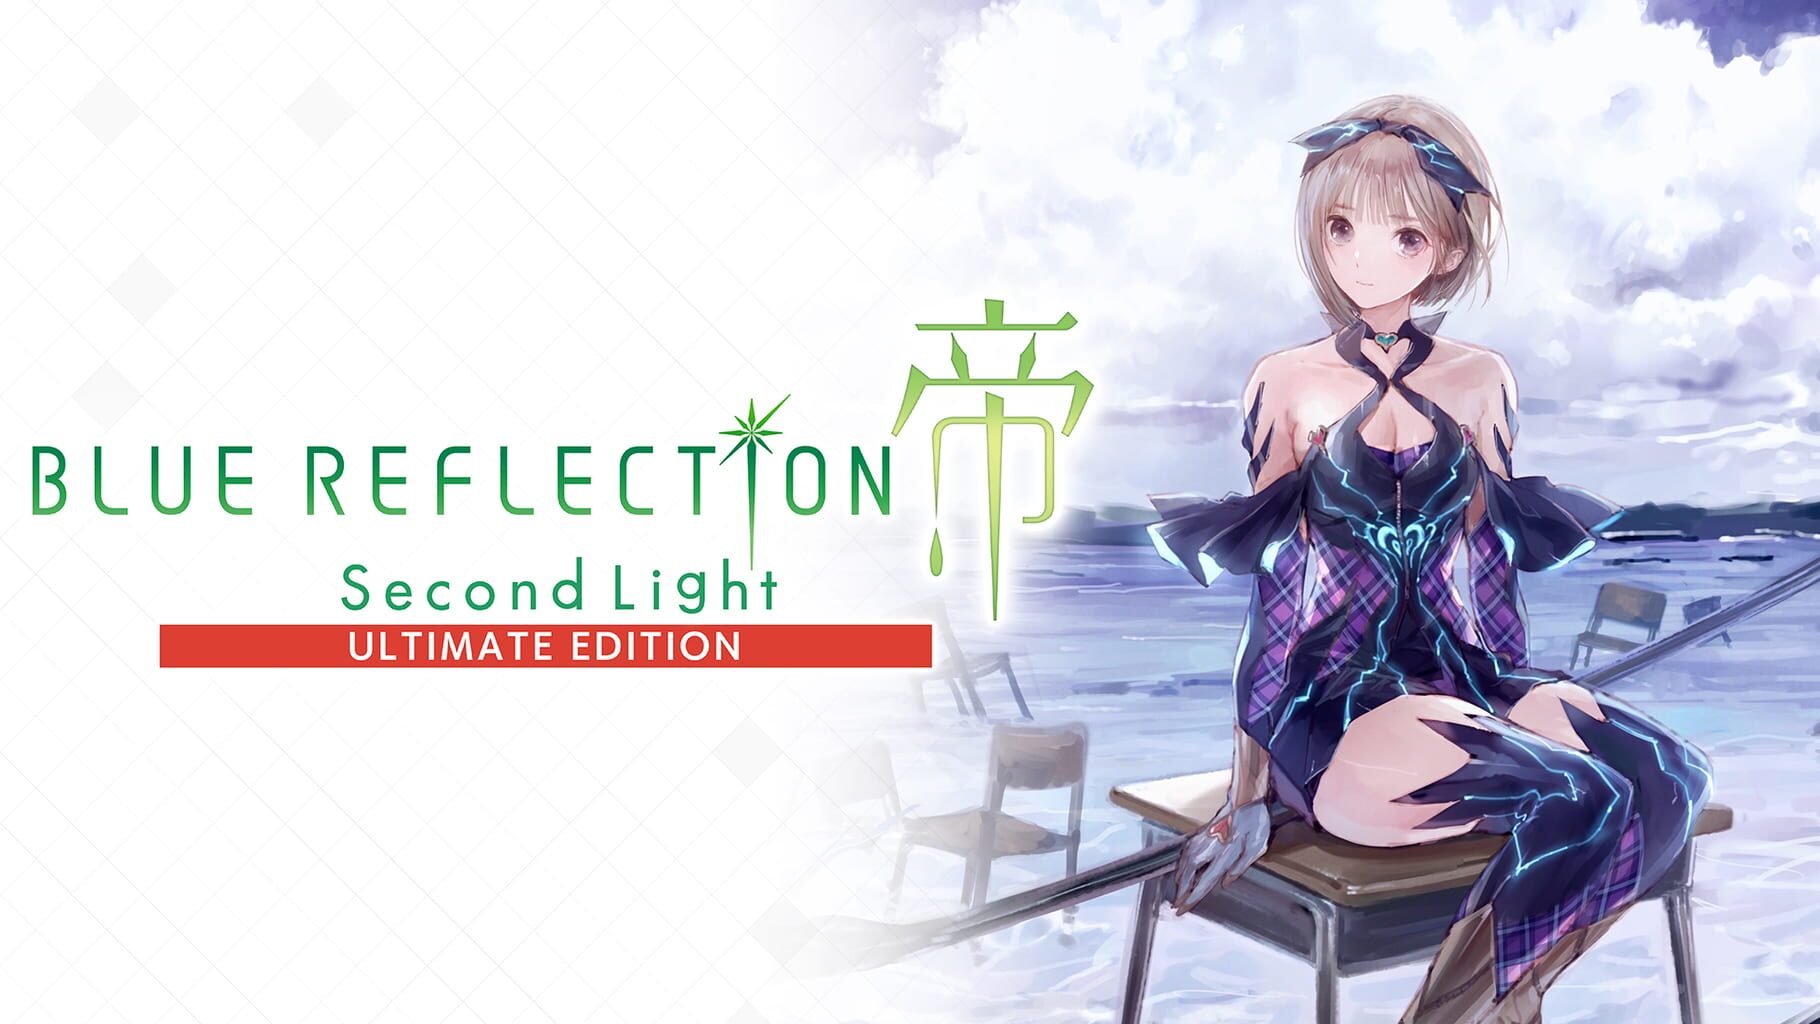 Blue Reflection: Second Light - Ultimate Edition artwork